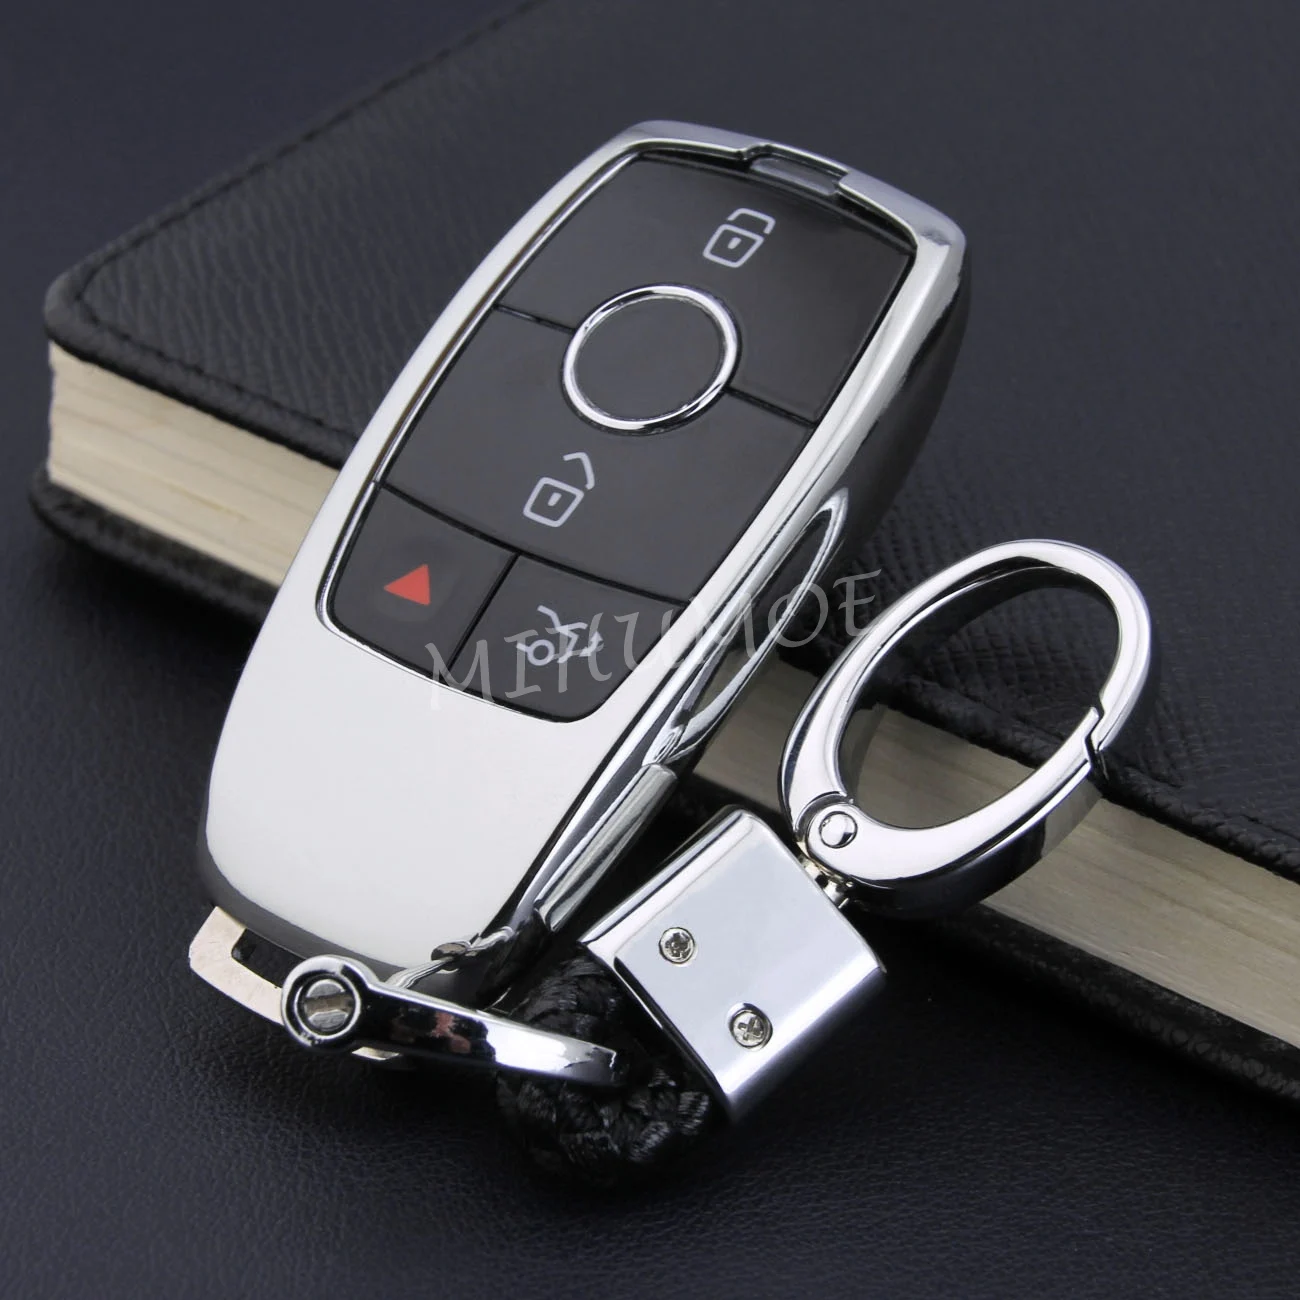 Details about   Alloy Chrome Silver Key Fob Case Cover For Mercedes Benz CLA CLS CLK GLK GLA GLC 